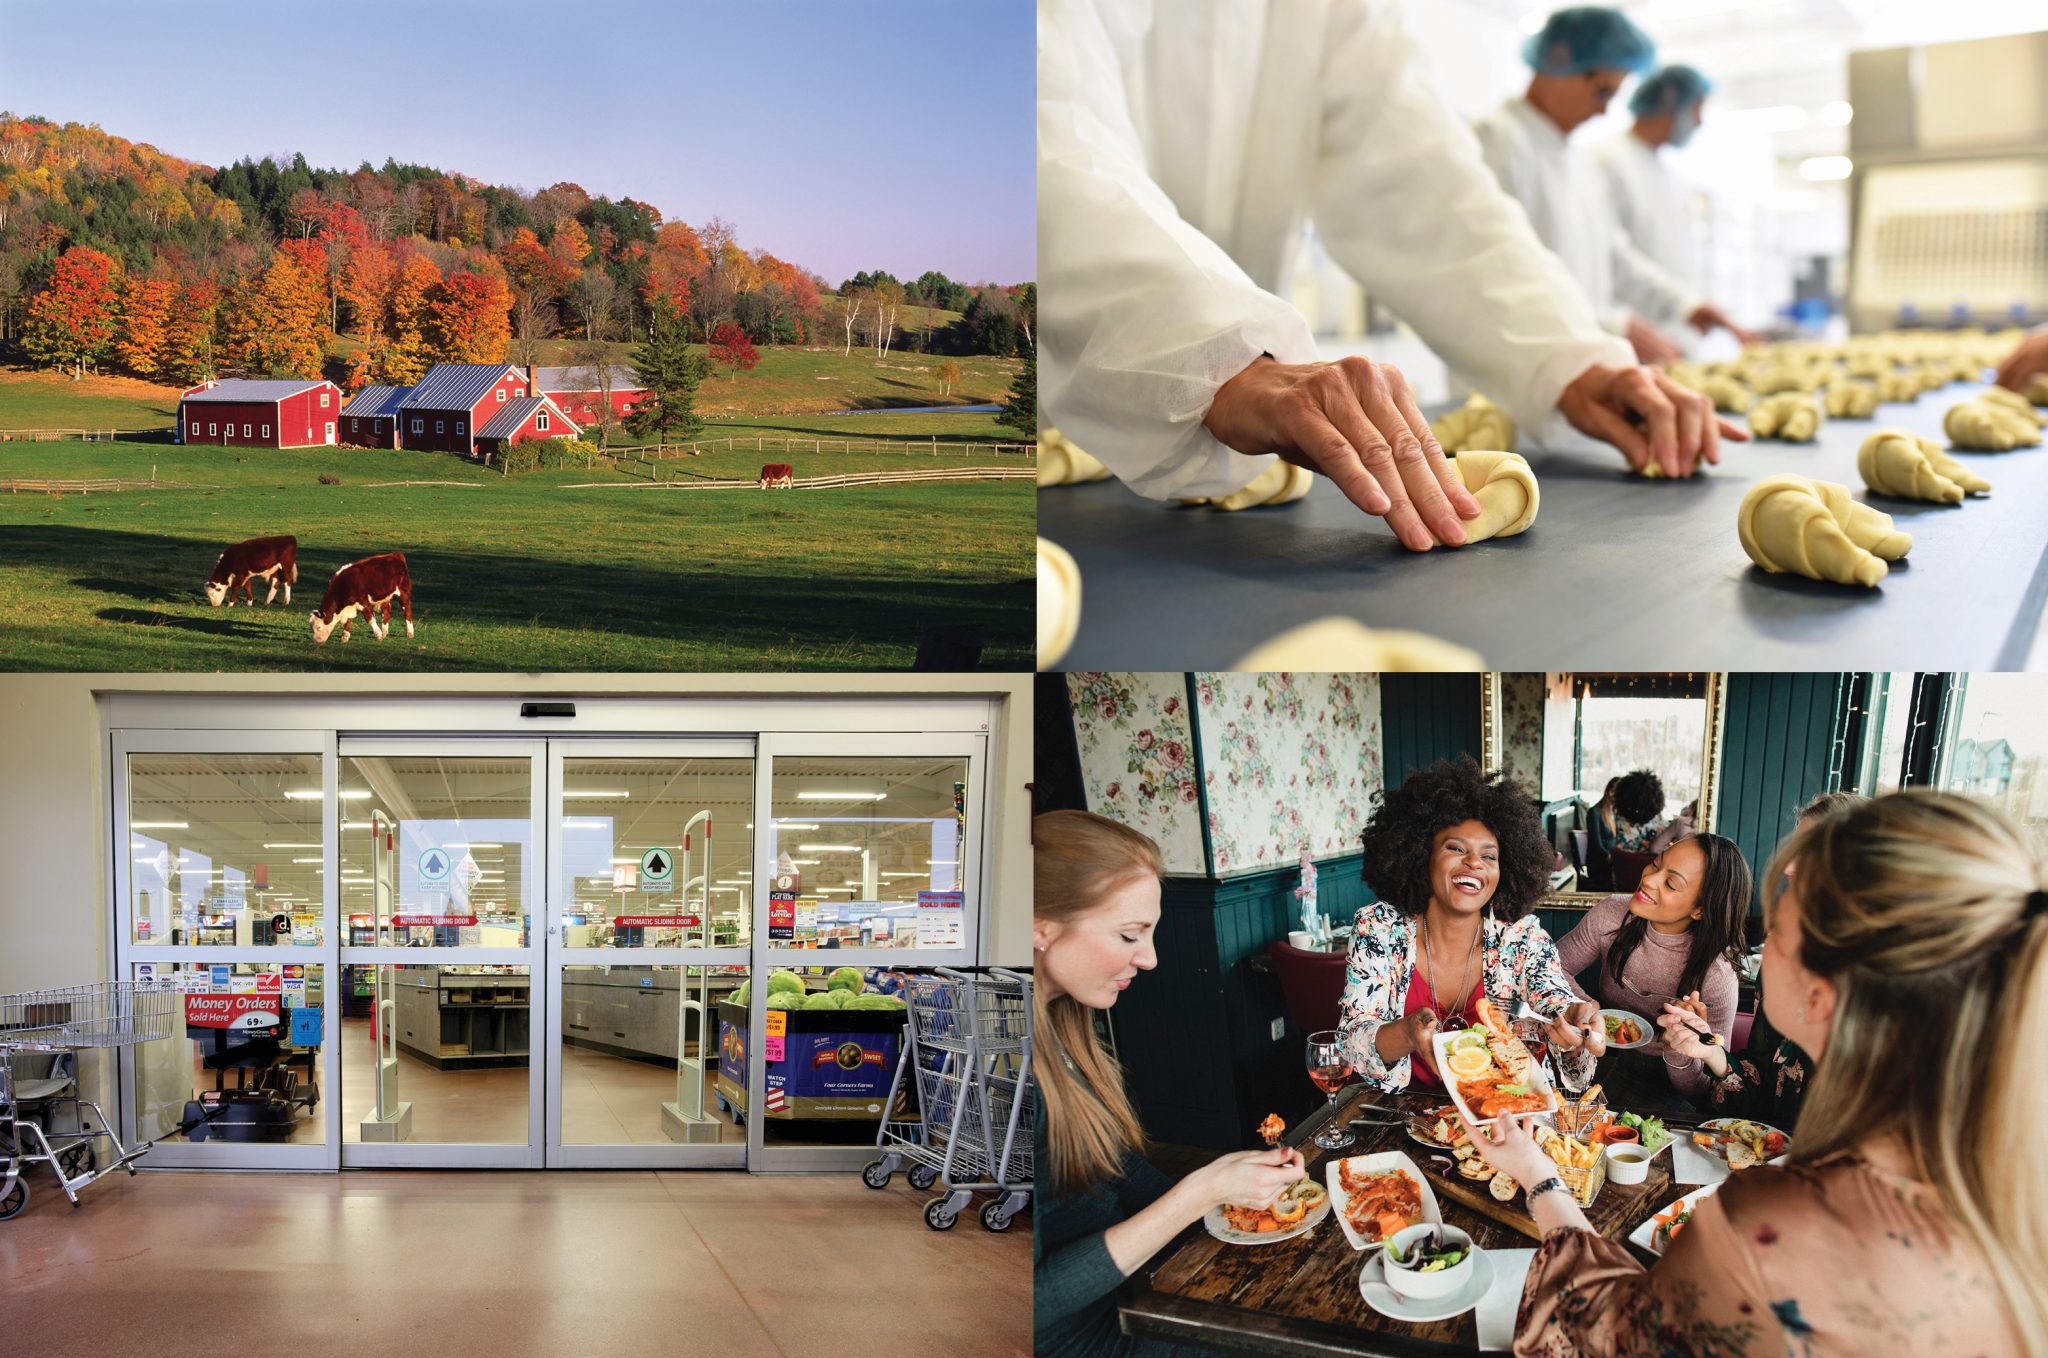 A collage of a farm, grocery store, people at lunch, and a professional kitchen